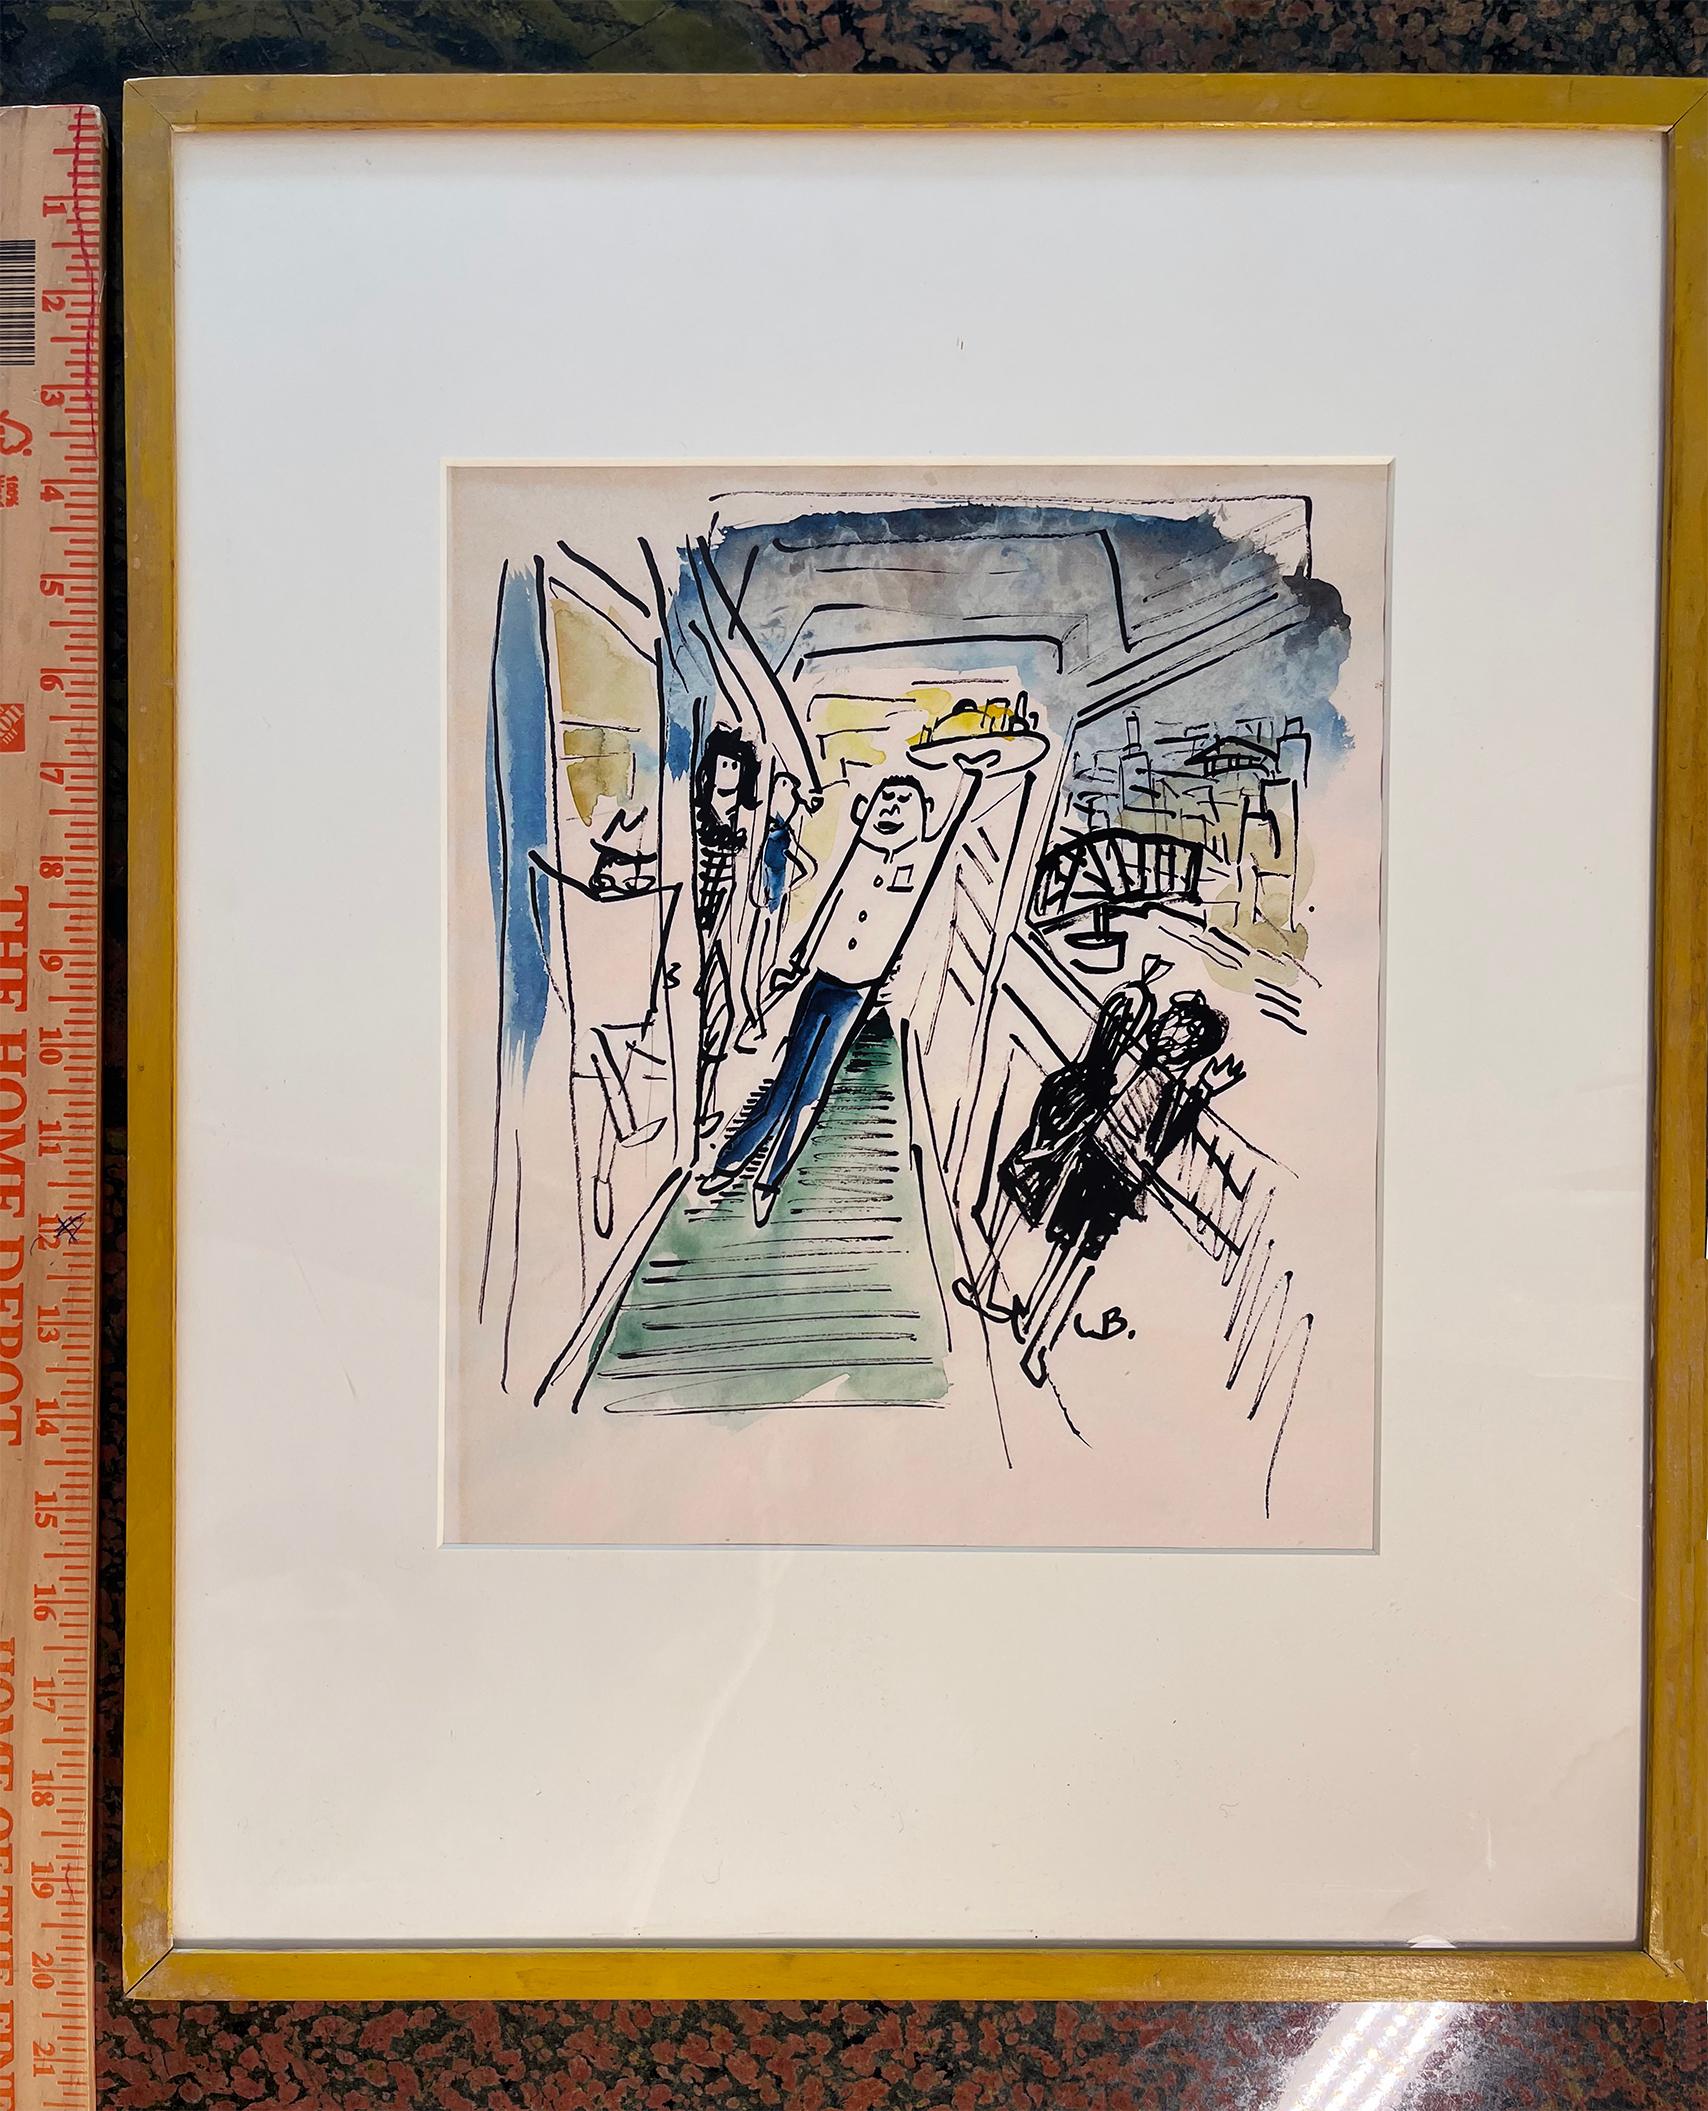 Waiter Dancing and Strutting on a Ship, Possible Madeline sighting - Modern Art by Ludwig Bemelmans